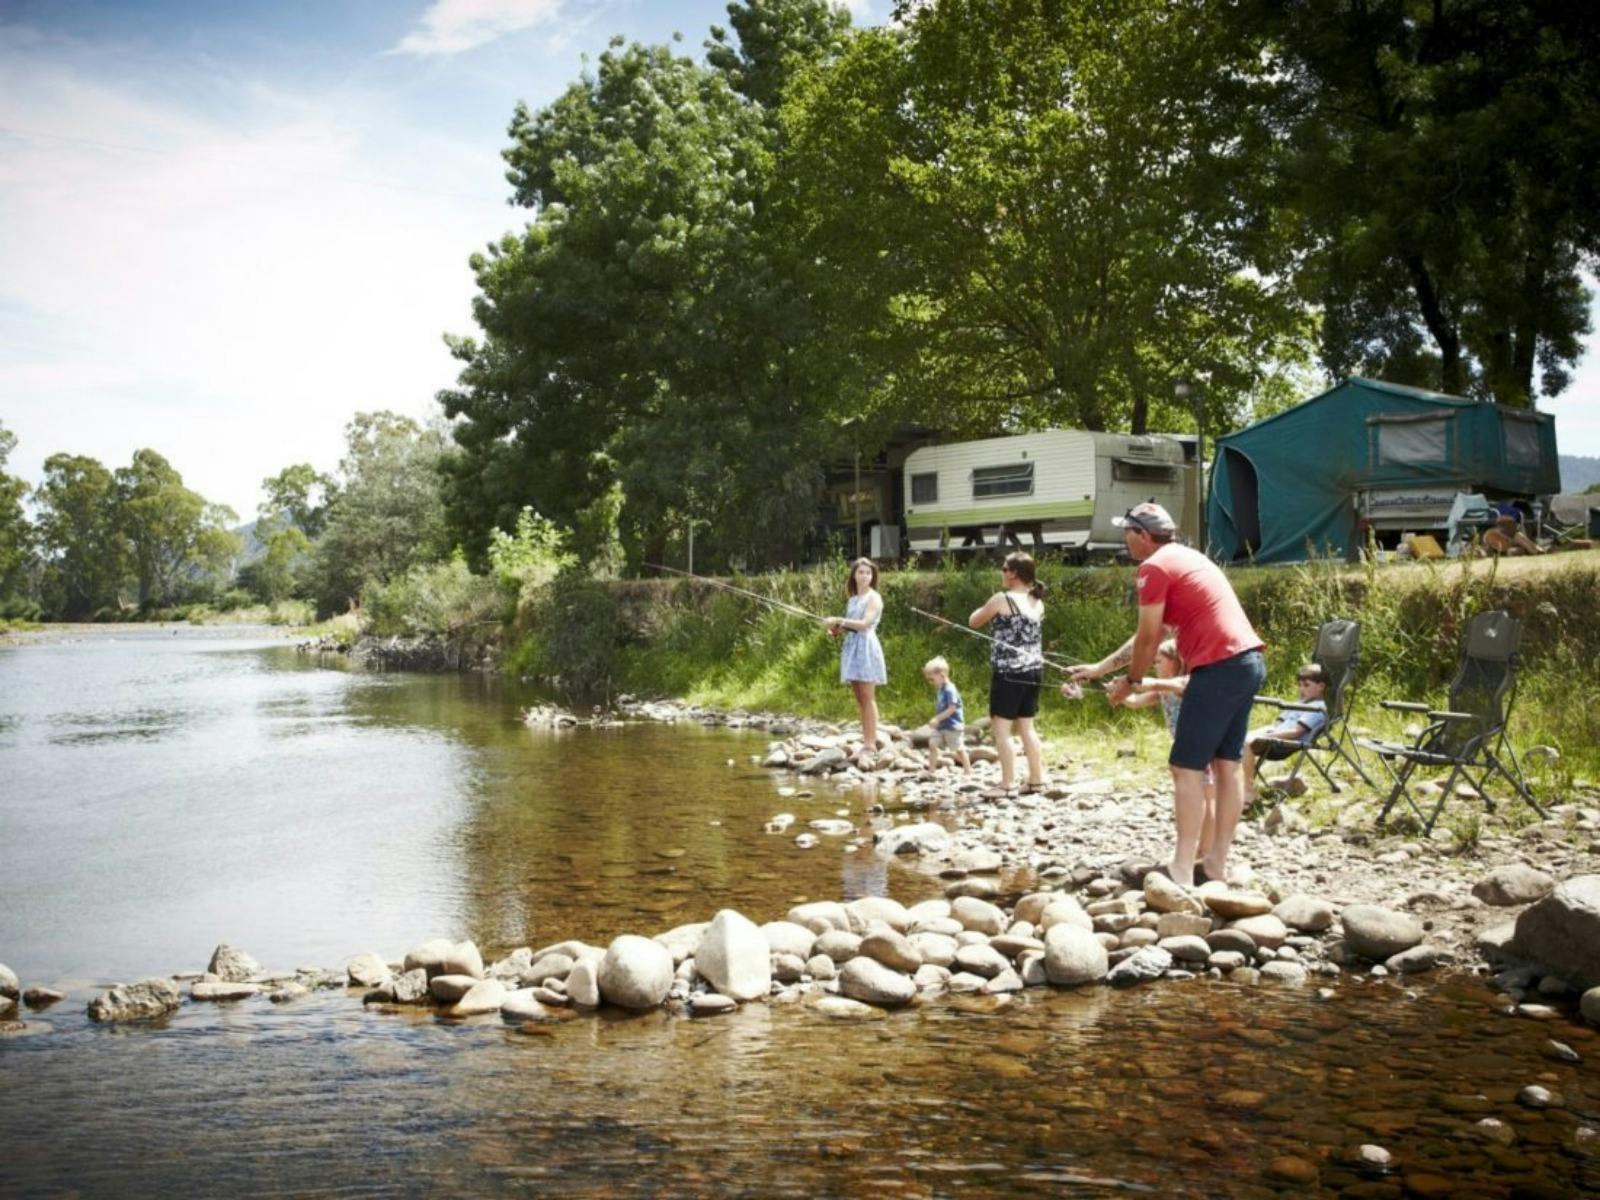 Family of 5 fishing from rocky riverbank, campers and caravans, trees, grass, sunny day